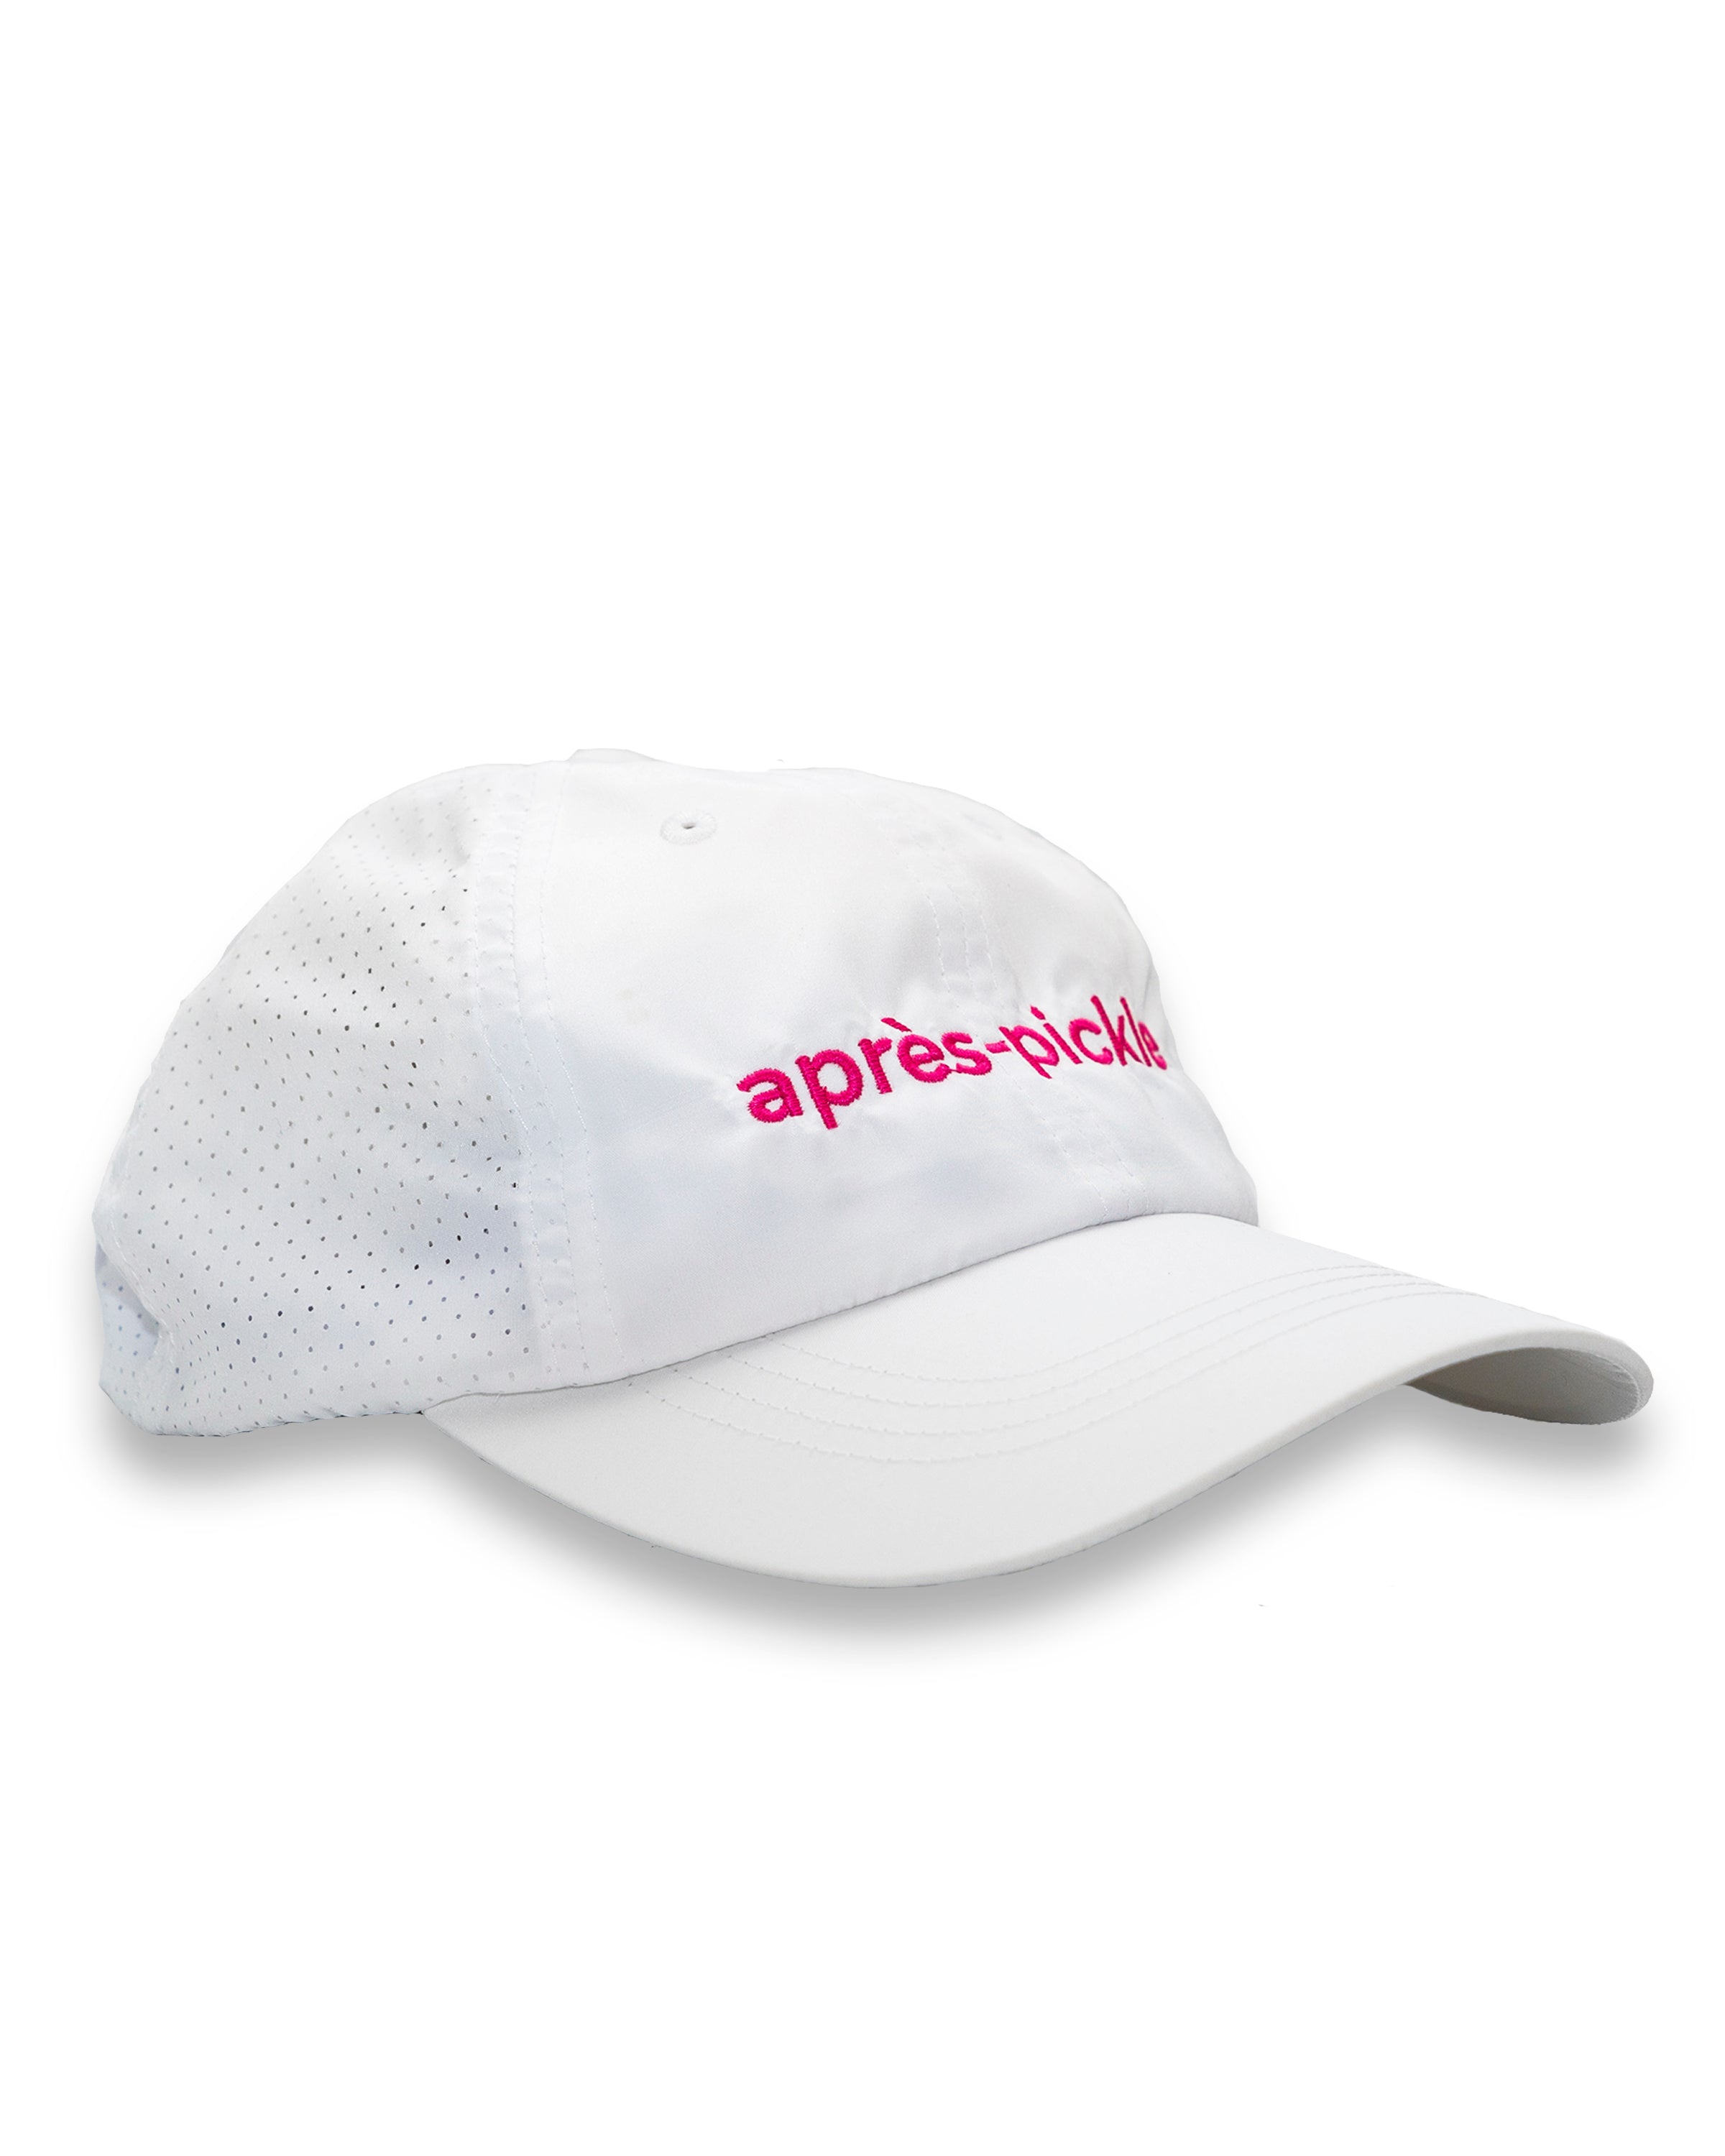 après-pickle Lightweight Perforated Cap